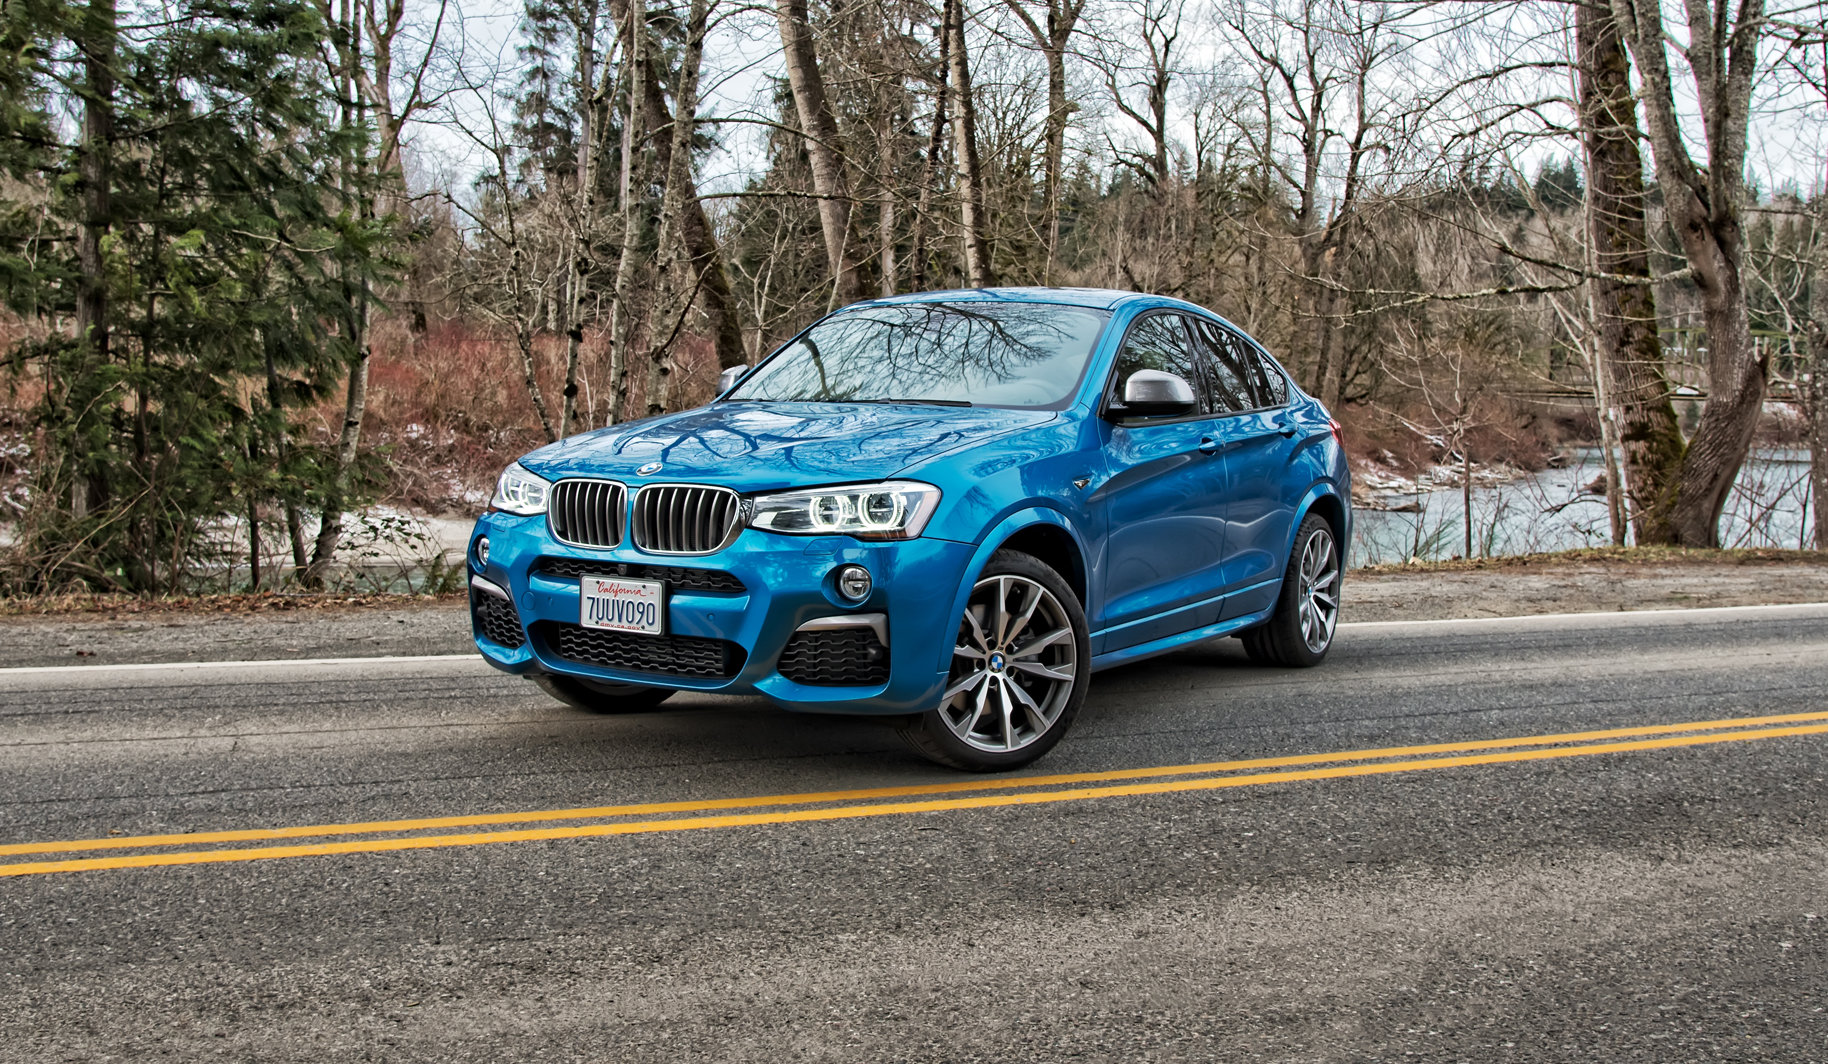 Driven | 2017 BMW X4 M40i - The New York Times